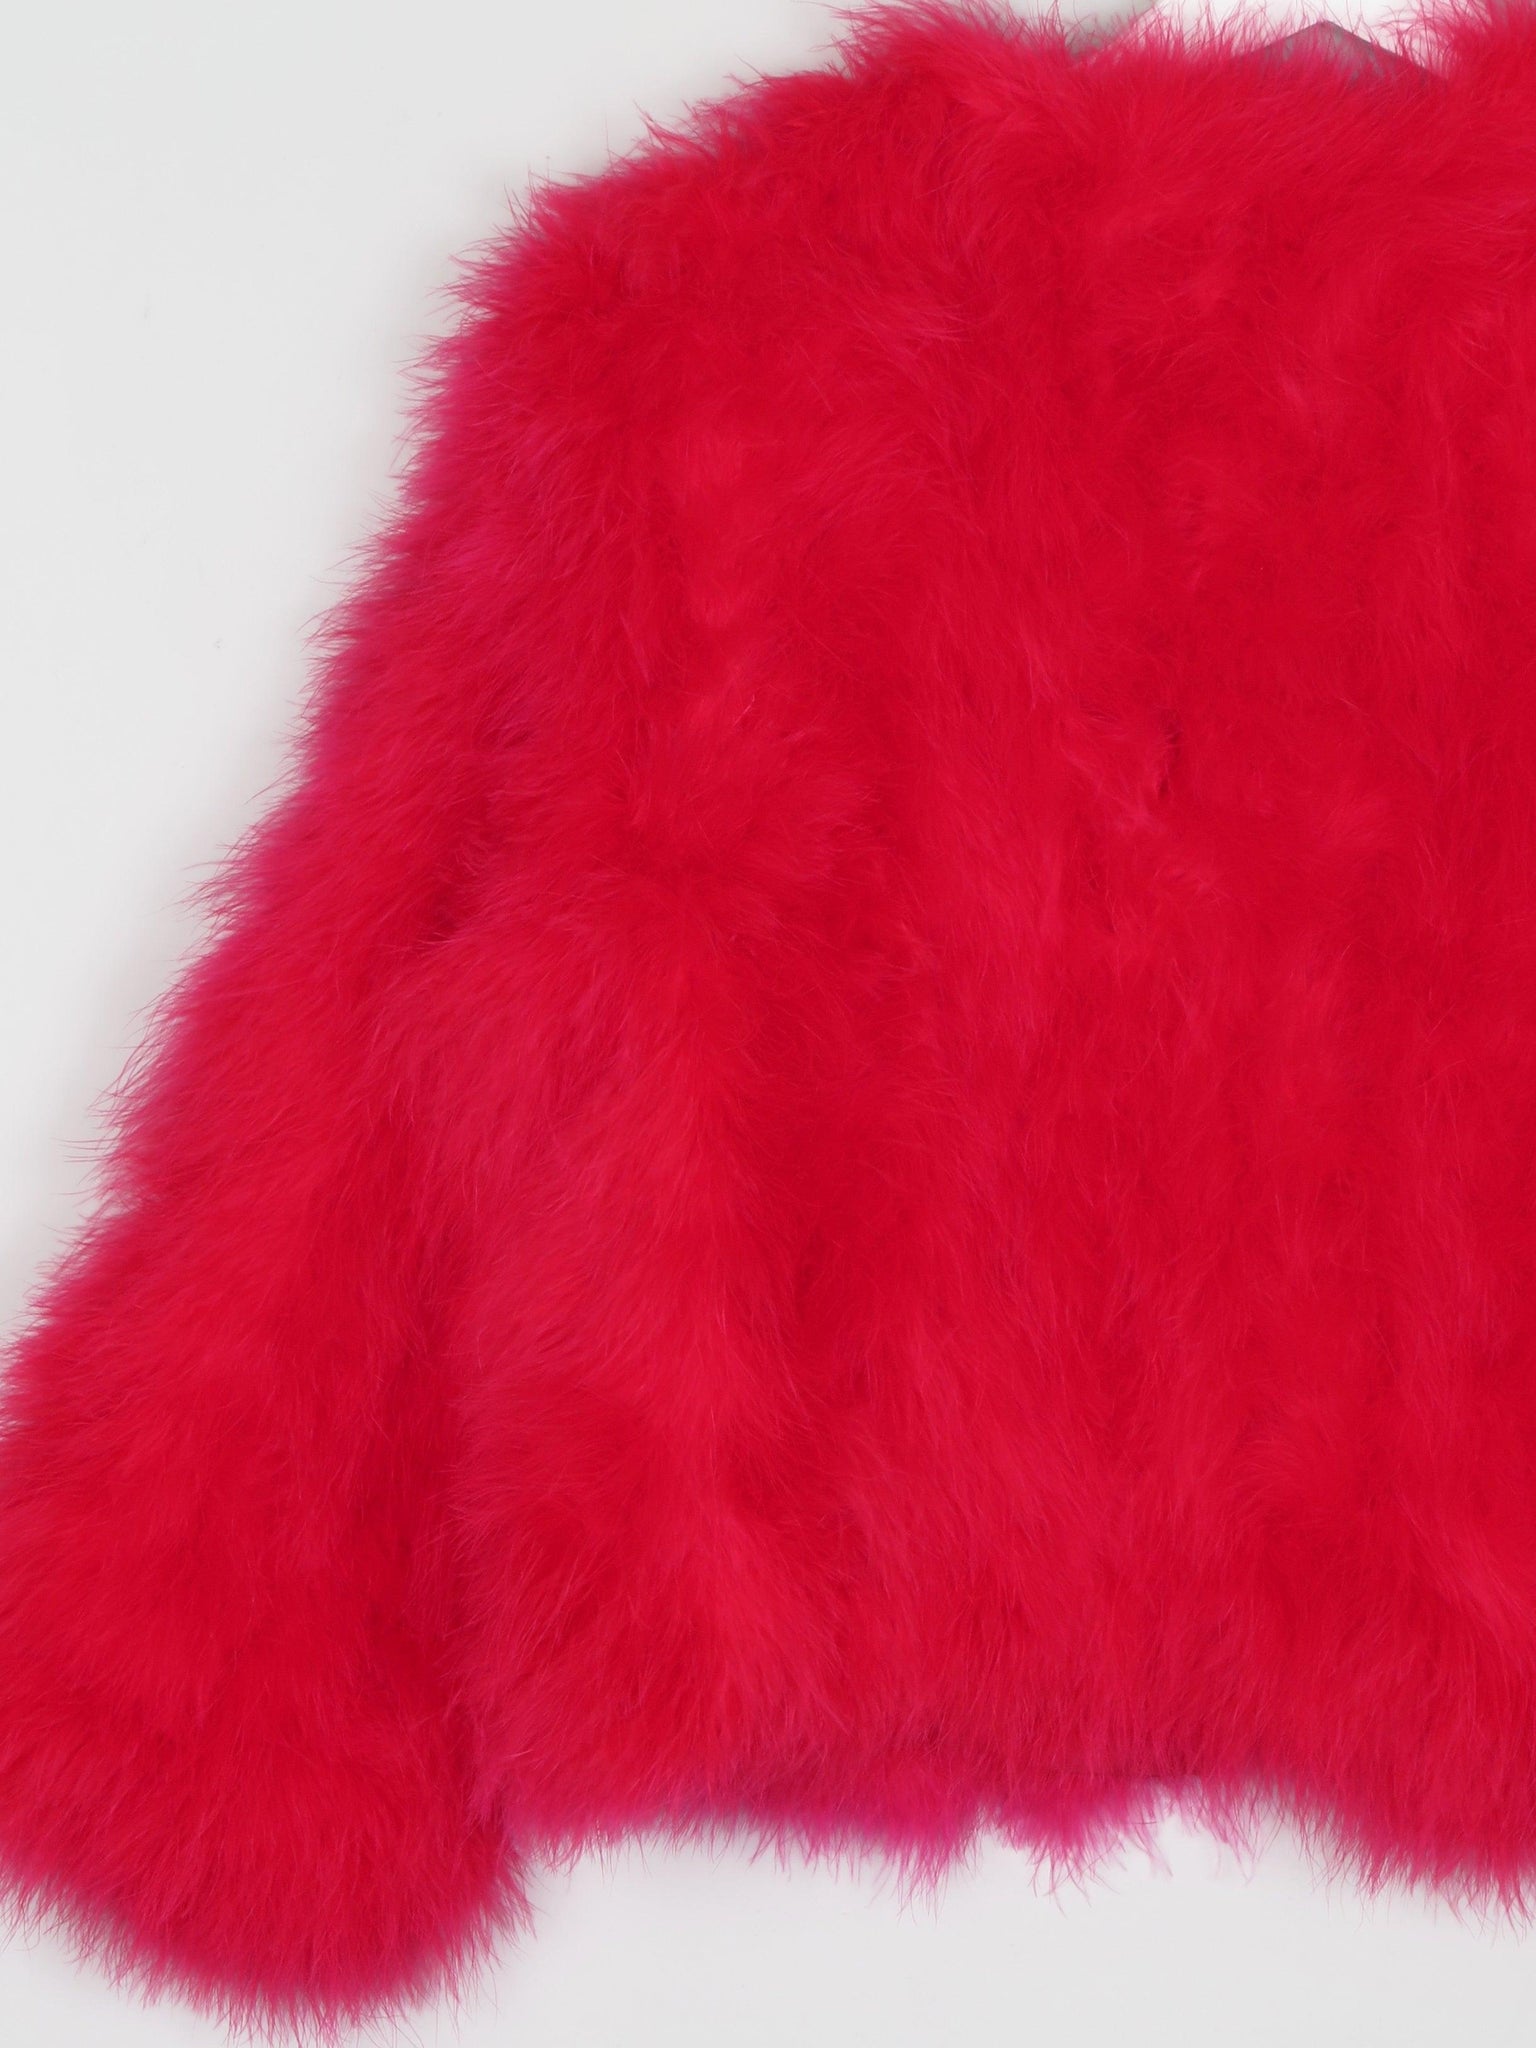 Women’s Red Marabou Feather Cropped Jacket Issa 8 - The Harlequin